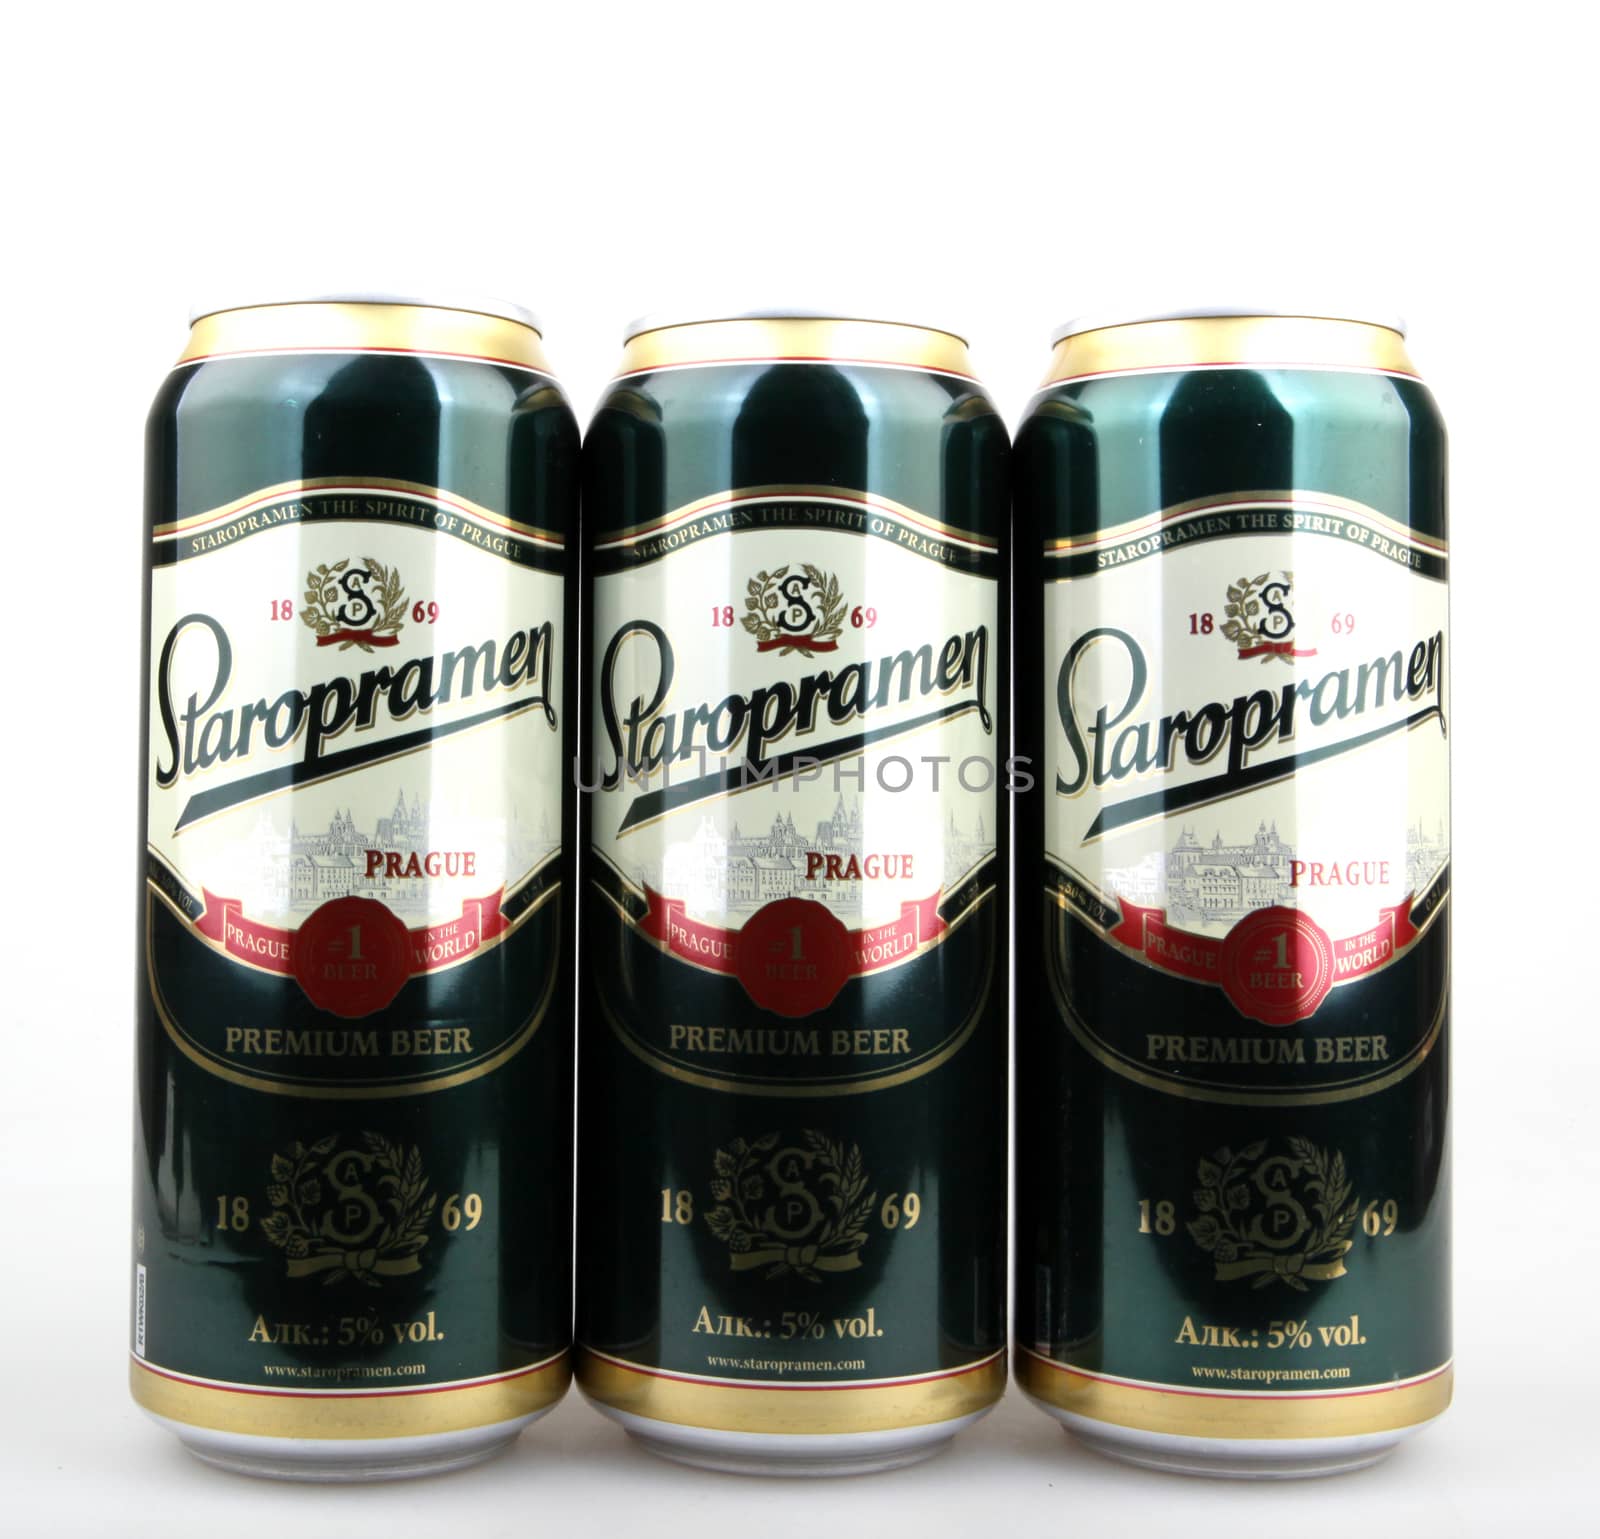 AYTOS, BULGARIA - MARCH 13, 2016: Staropramen isolated on white. Staropramen Brewery is the second largest brewery in the Czech Republic, and is situated in the Smíchov district of Prague.